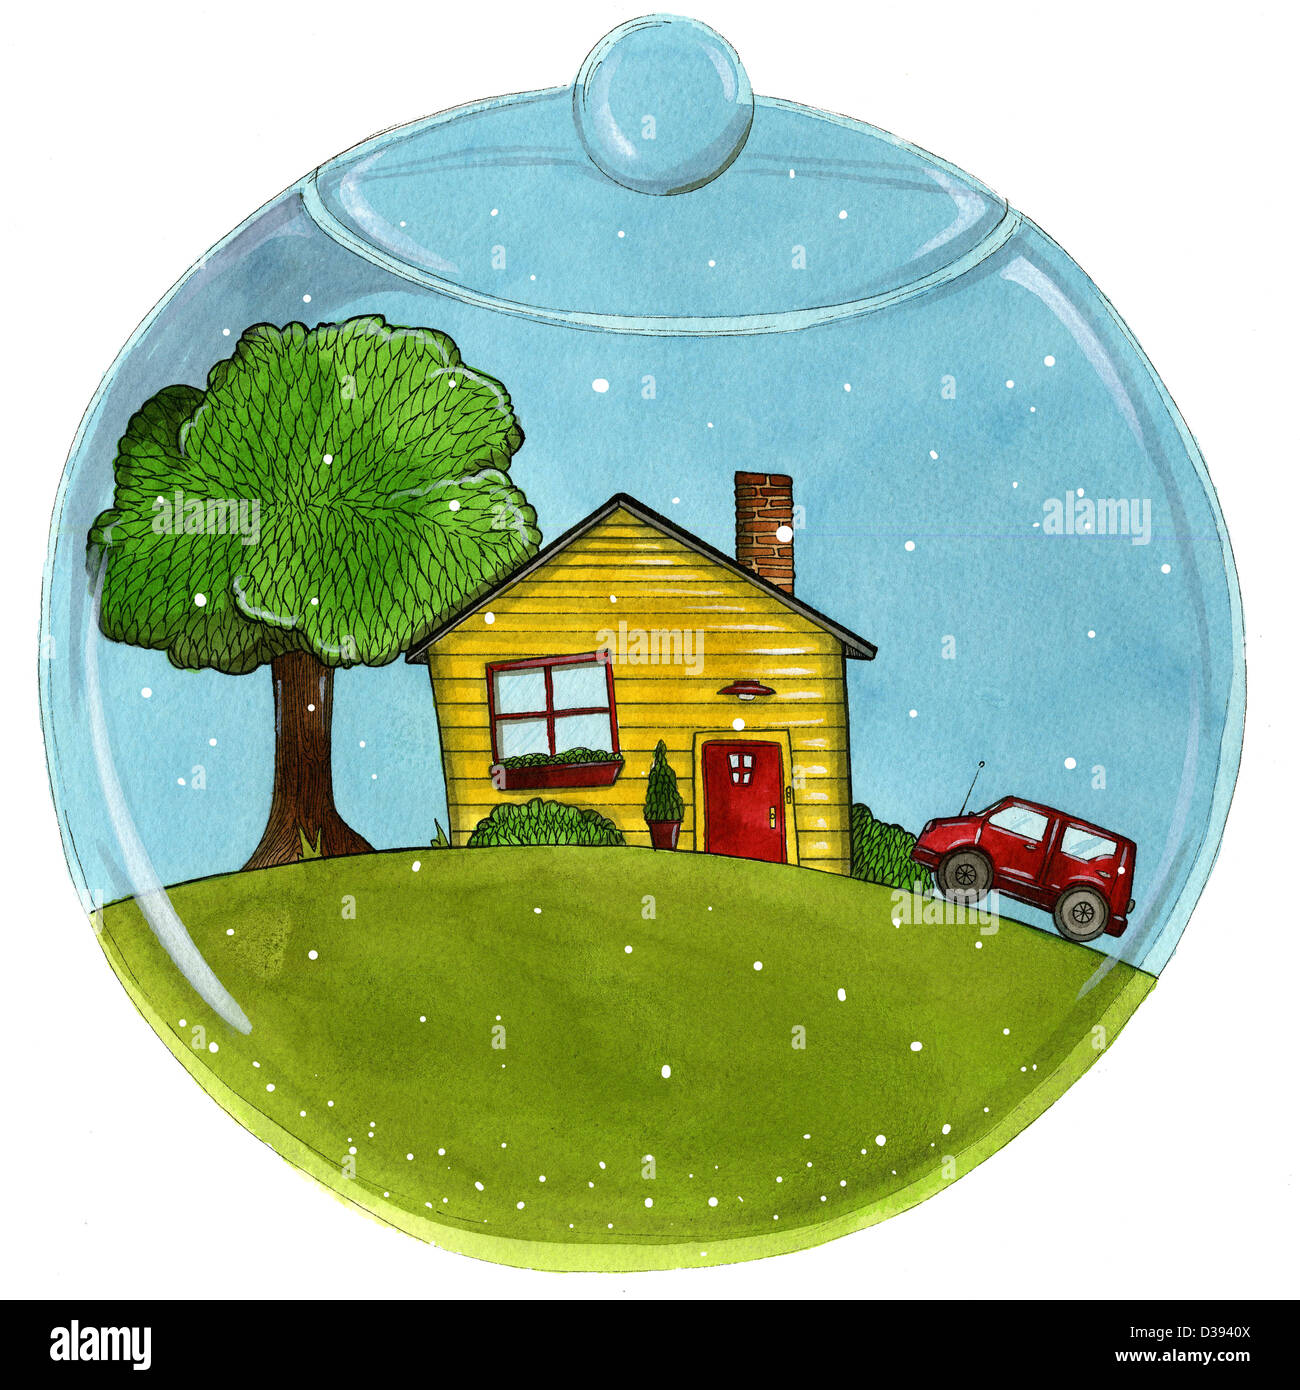 Comfort life of a house and vehicle in a transparent bowl Stock Photo